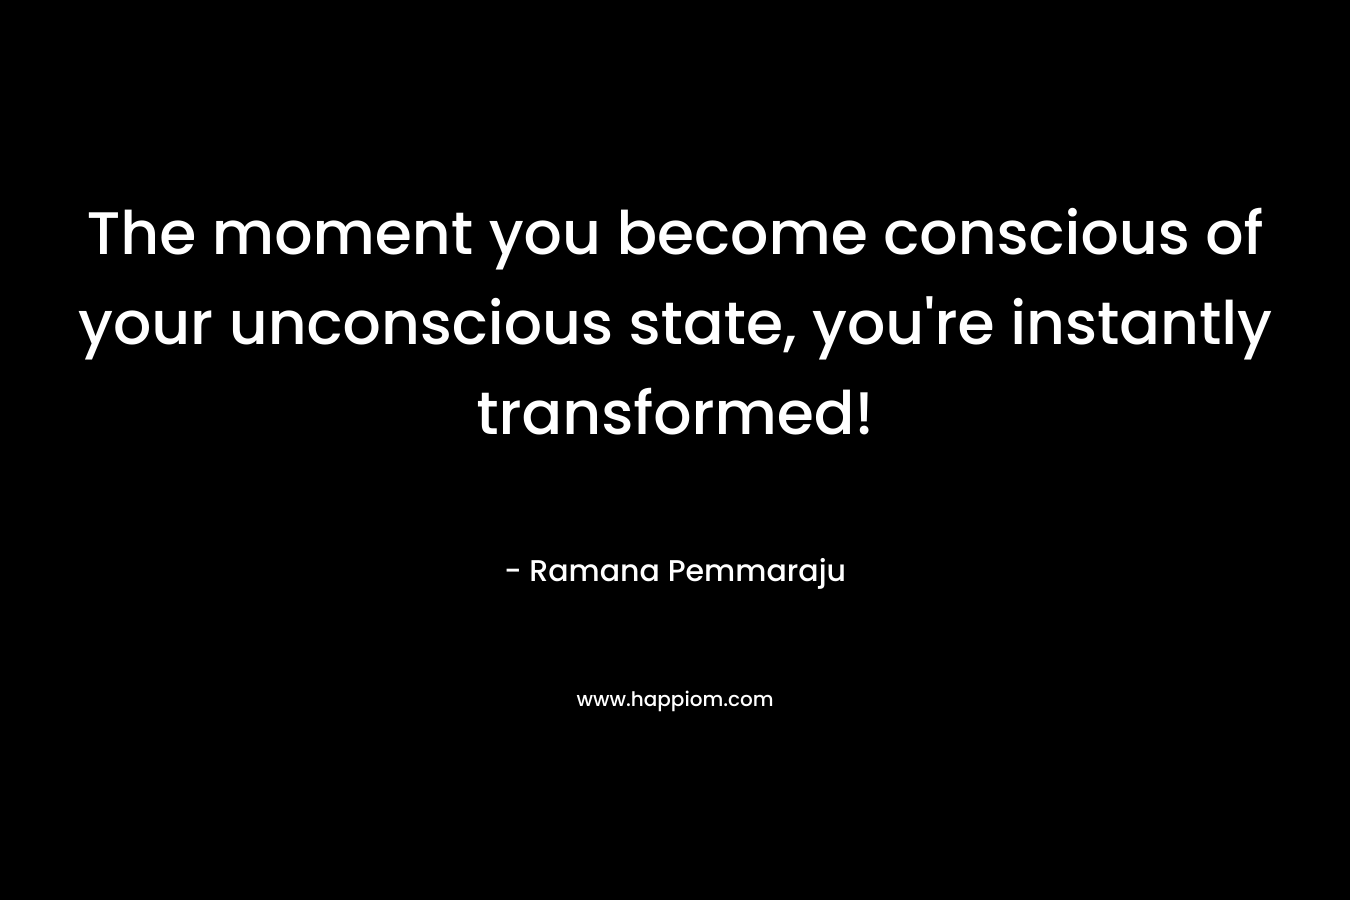 The moment you become conscious of your unconscious state, you're instantly transformed!